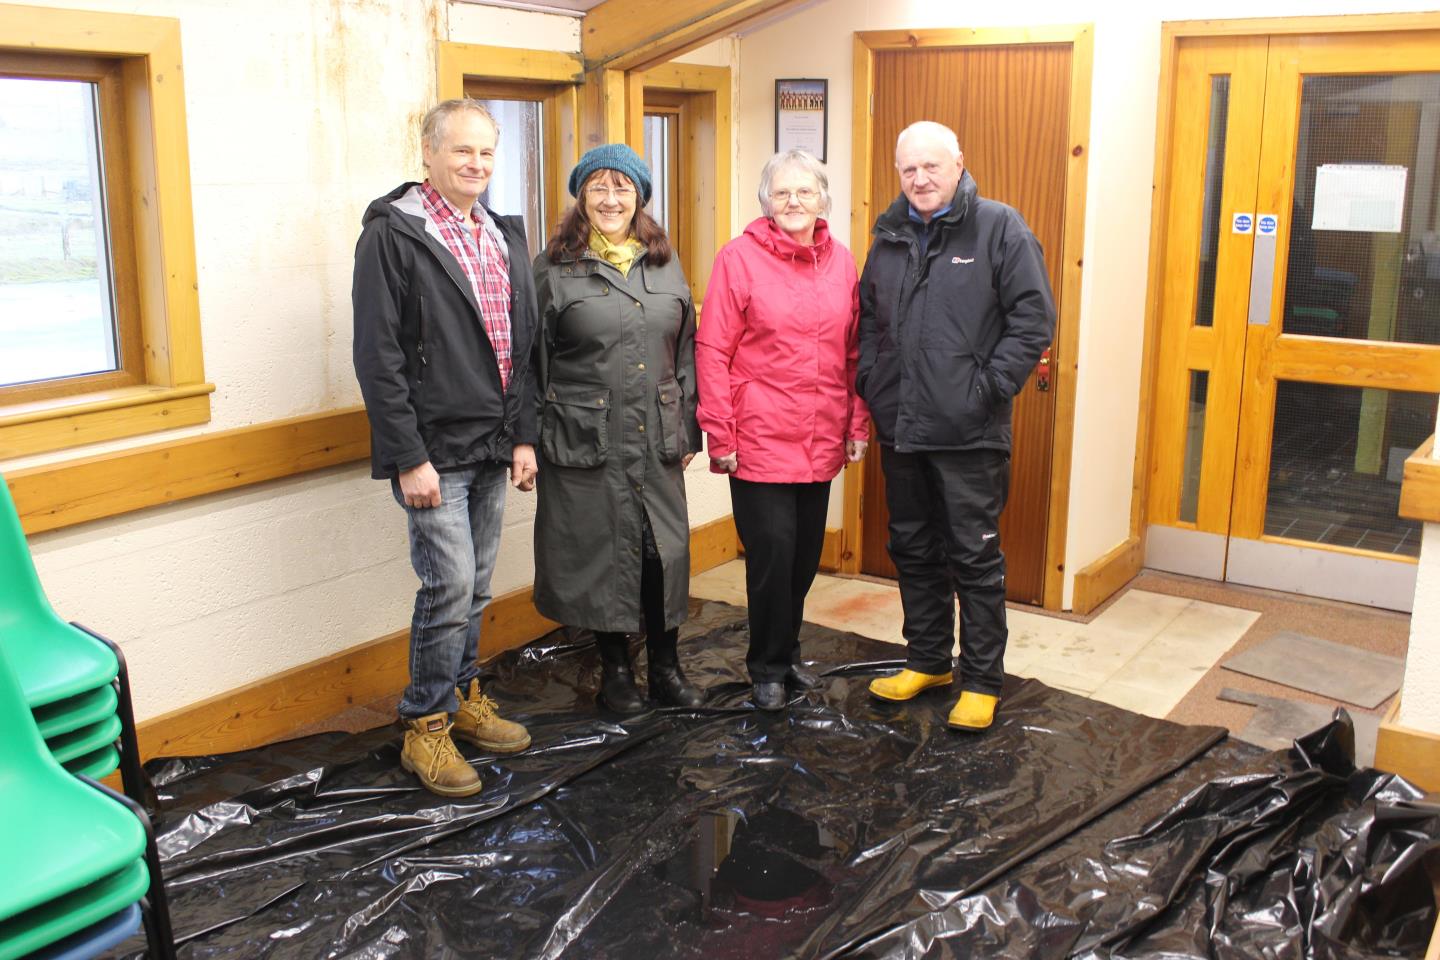 Berneray Community Association committee members Nigel Buckley, Joanne Vincent, Chrissie MacAskill and Iain MacKillop pictured on a recent wet day, which necessitated the spreading of a tarpaulin on the hall floor to catch the incoming water.